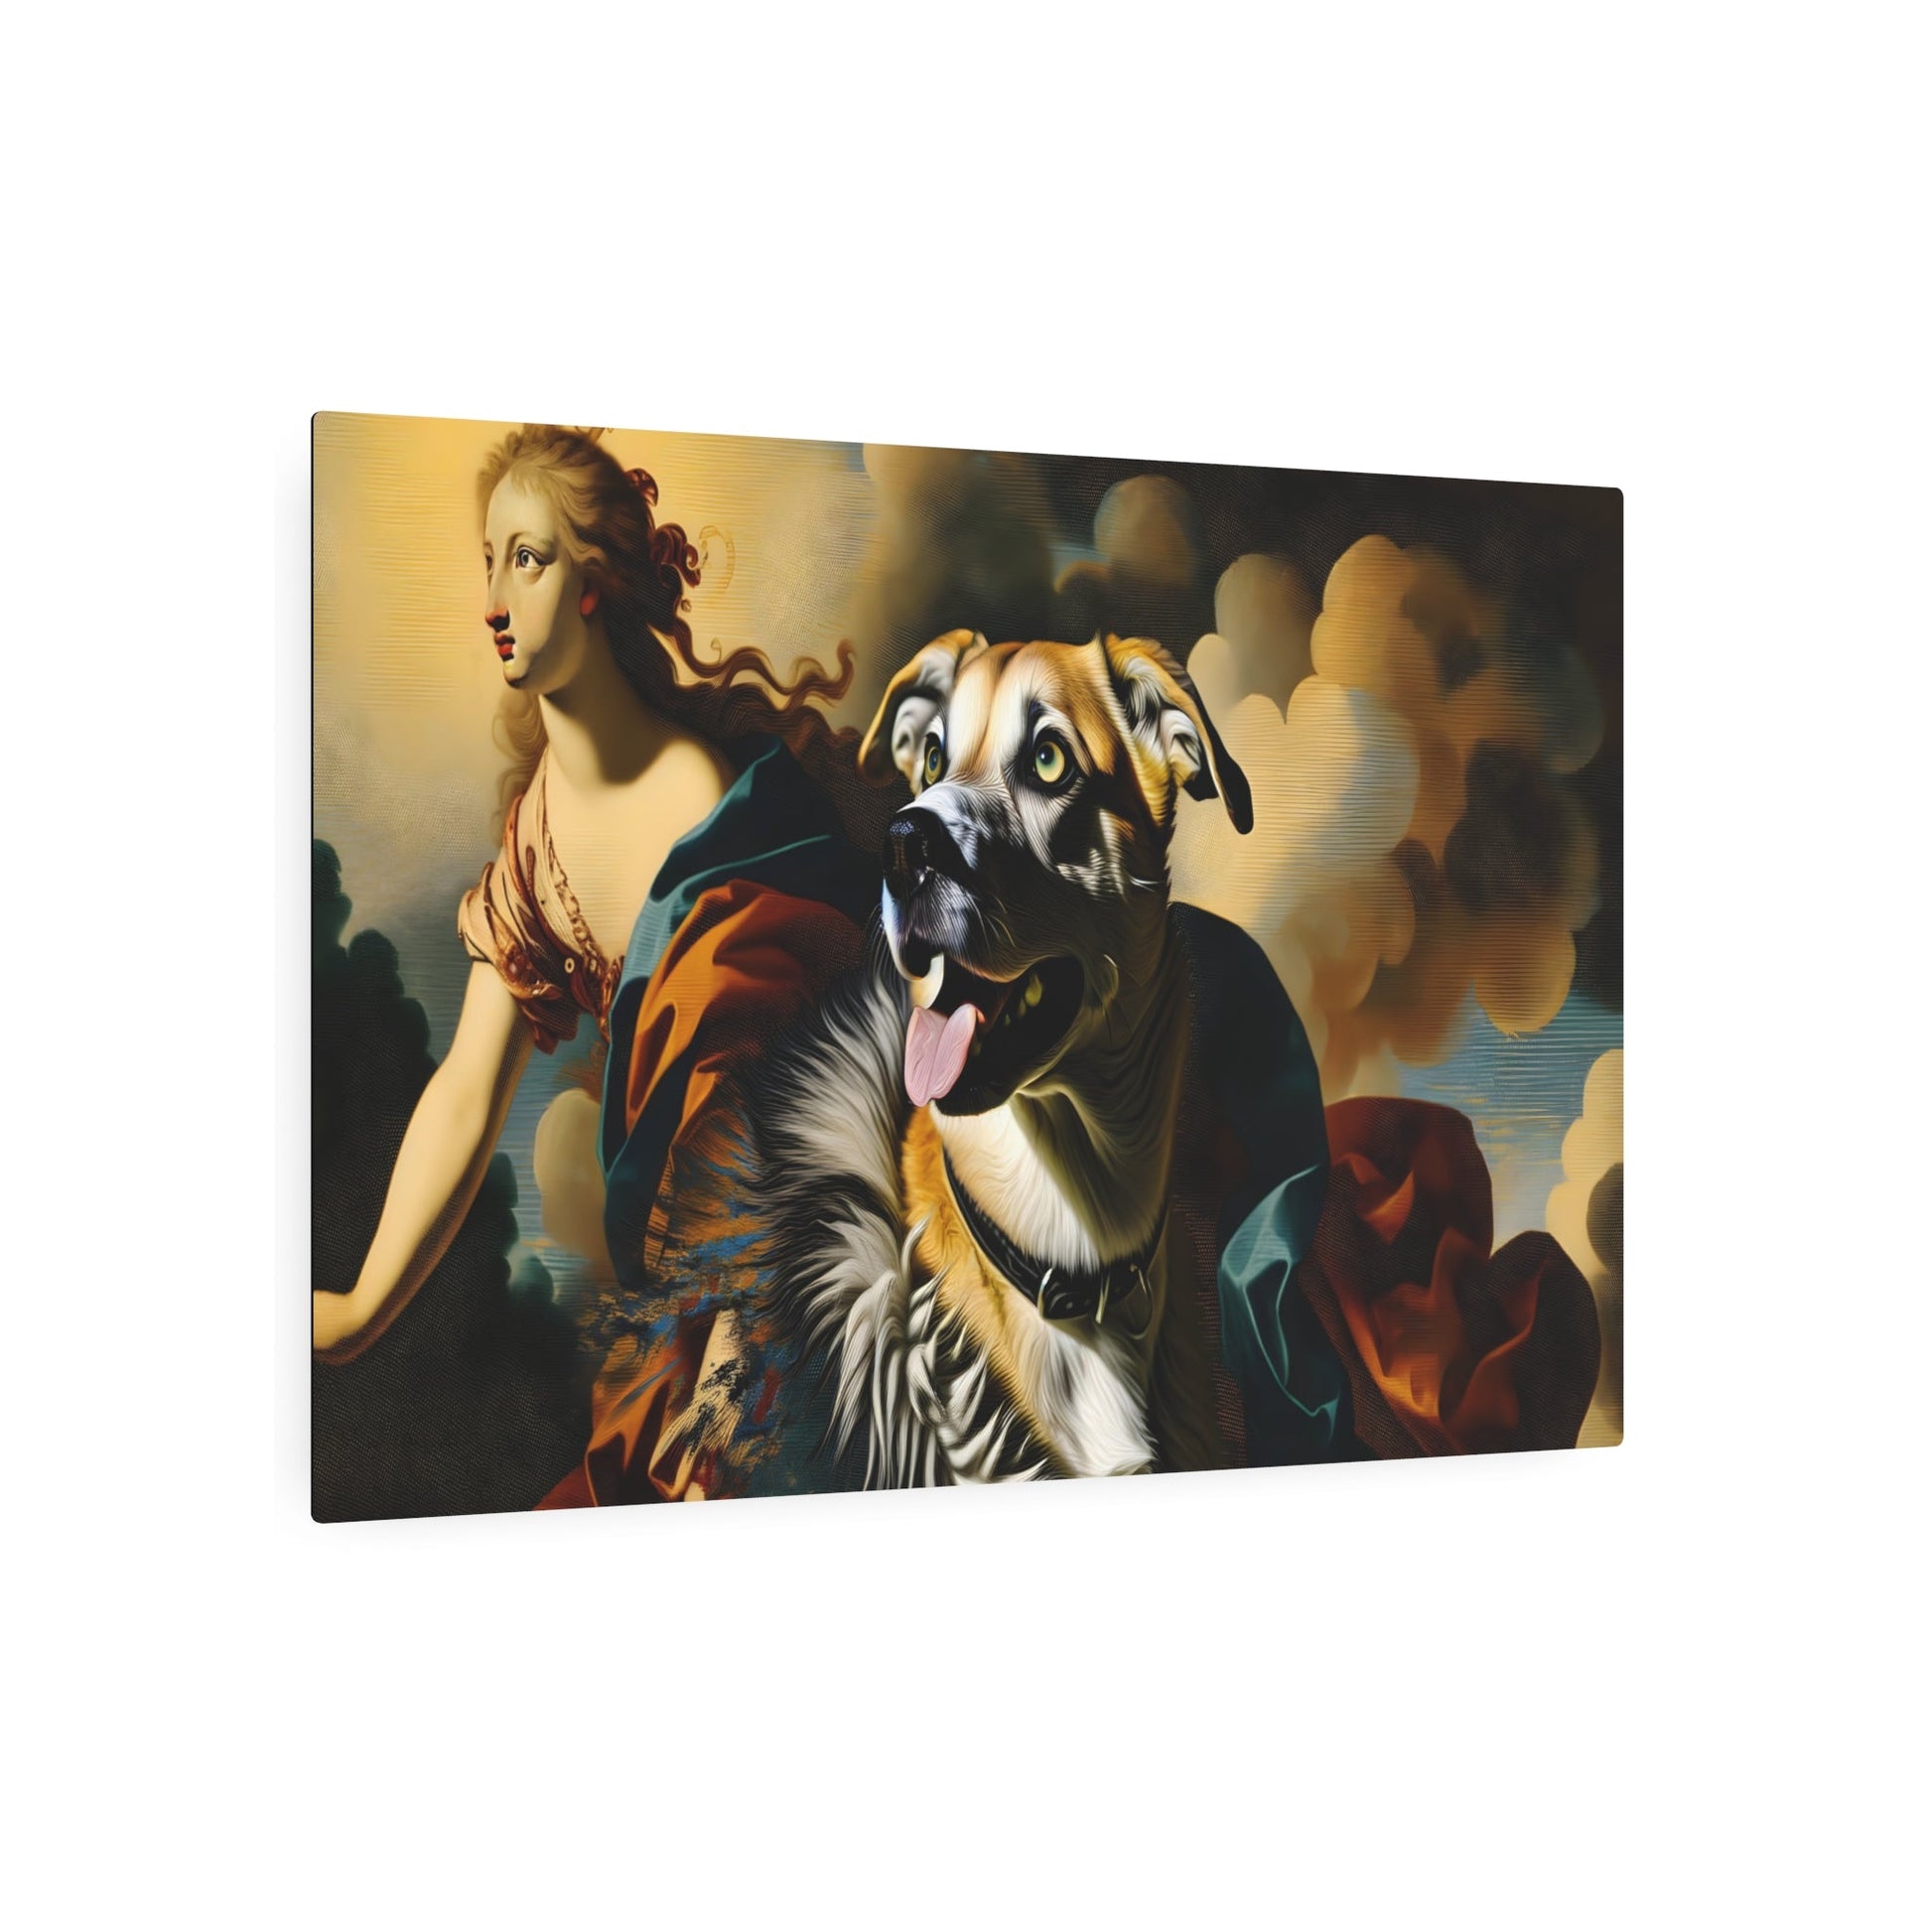 Metal Poster Art | "Baroque Art Style Dog Portrait - Lavish Western Art with Dramatic Posture and Deep Color Contrasts" - Metal Poster Art 36″ x 24″ (Horizontal) 0.12''